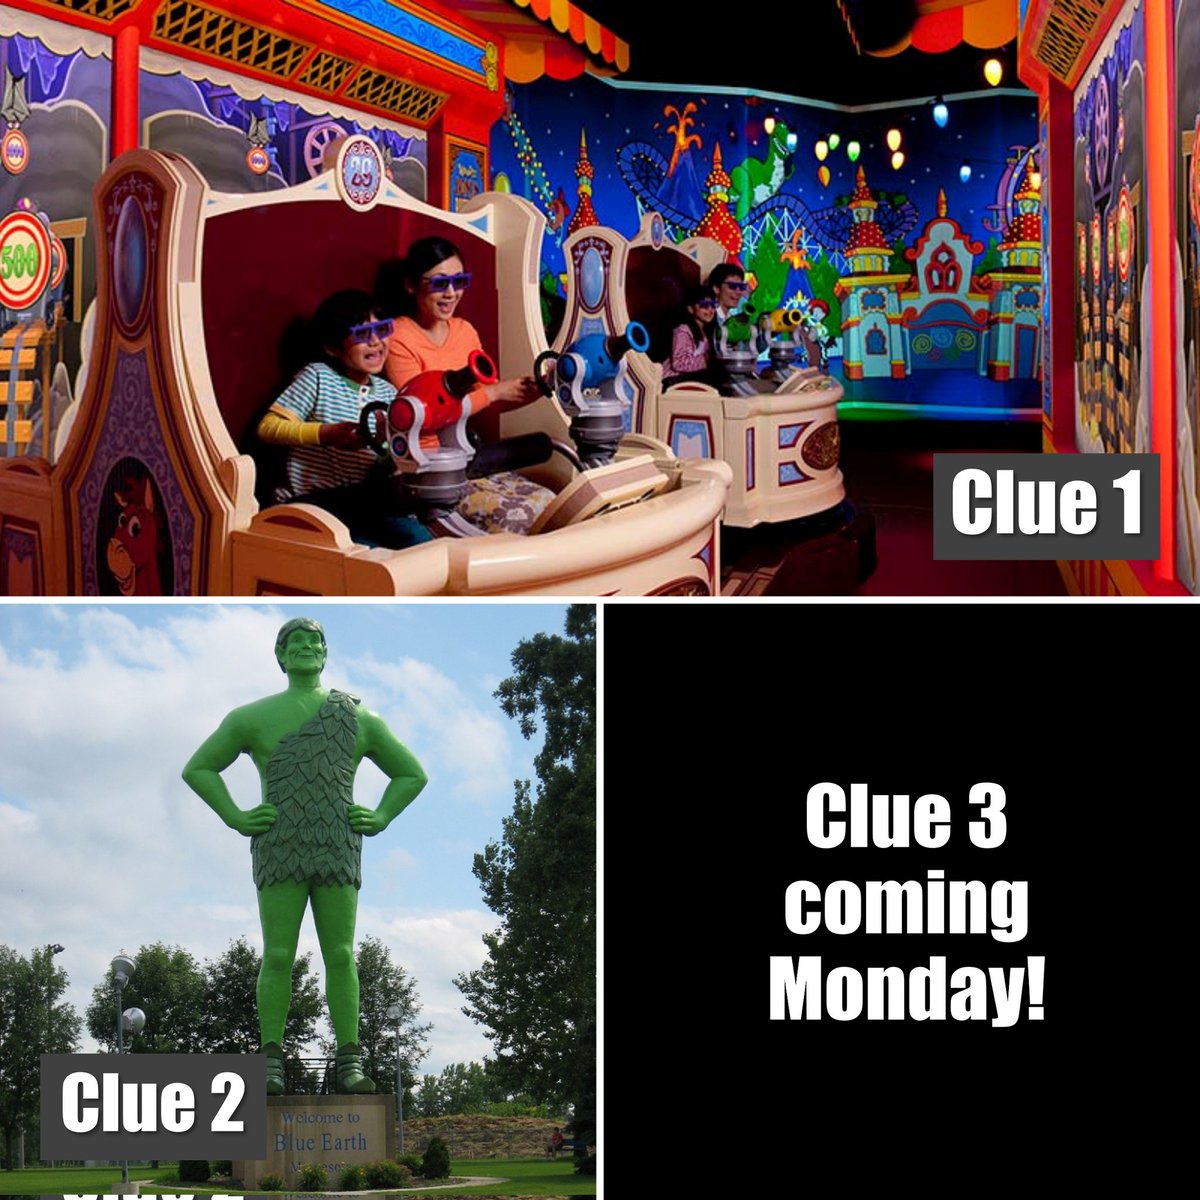 ❓What ✨️BIG✨️ decor surprise are we debuting at the Havana Christmas Tree Farm❓Here are 2️⃣ of 3️⃣ clues! 🔎 Share your guesses below before our BIG reveal on Tuesday! 👇